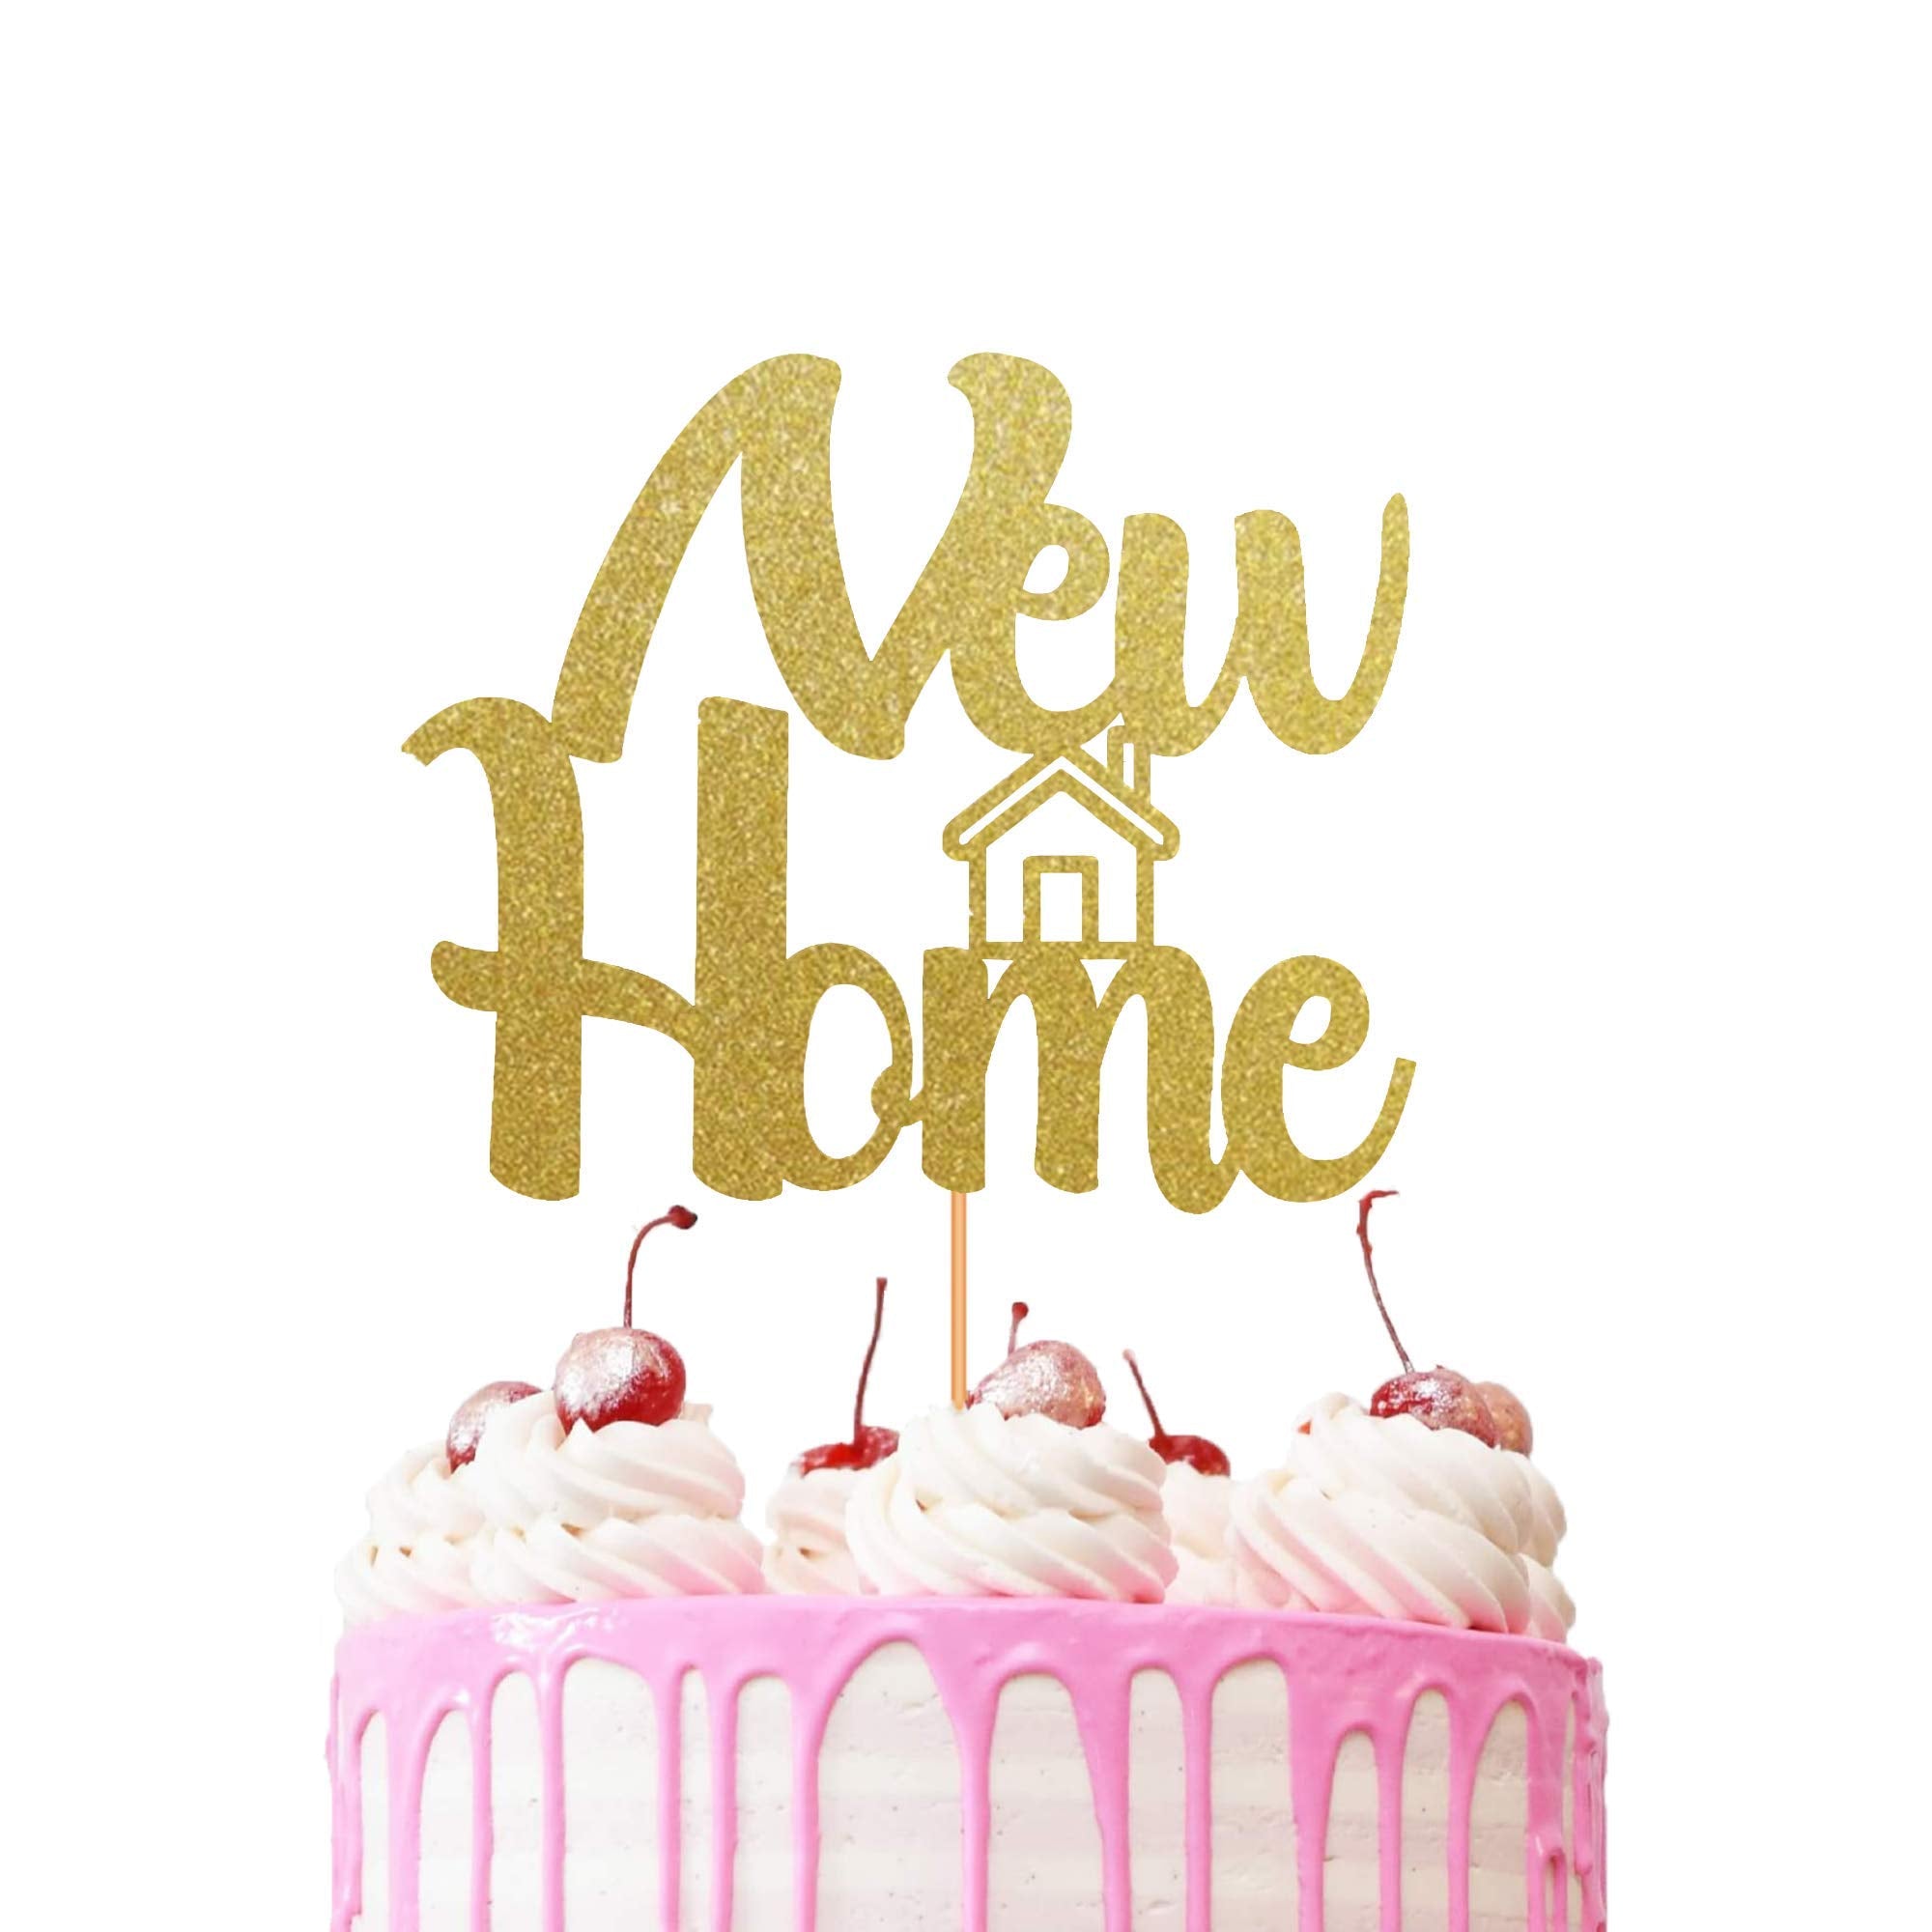 NEW HOME Cake Topper Glitter Cardstock Housewarming Decoration Centerpiece Toppers (GOLD)